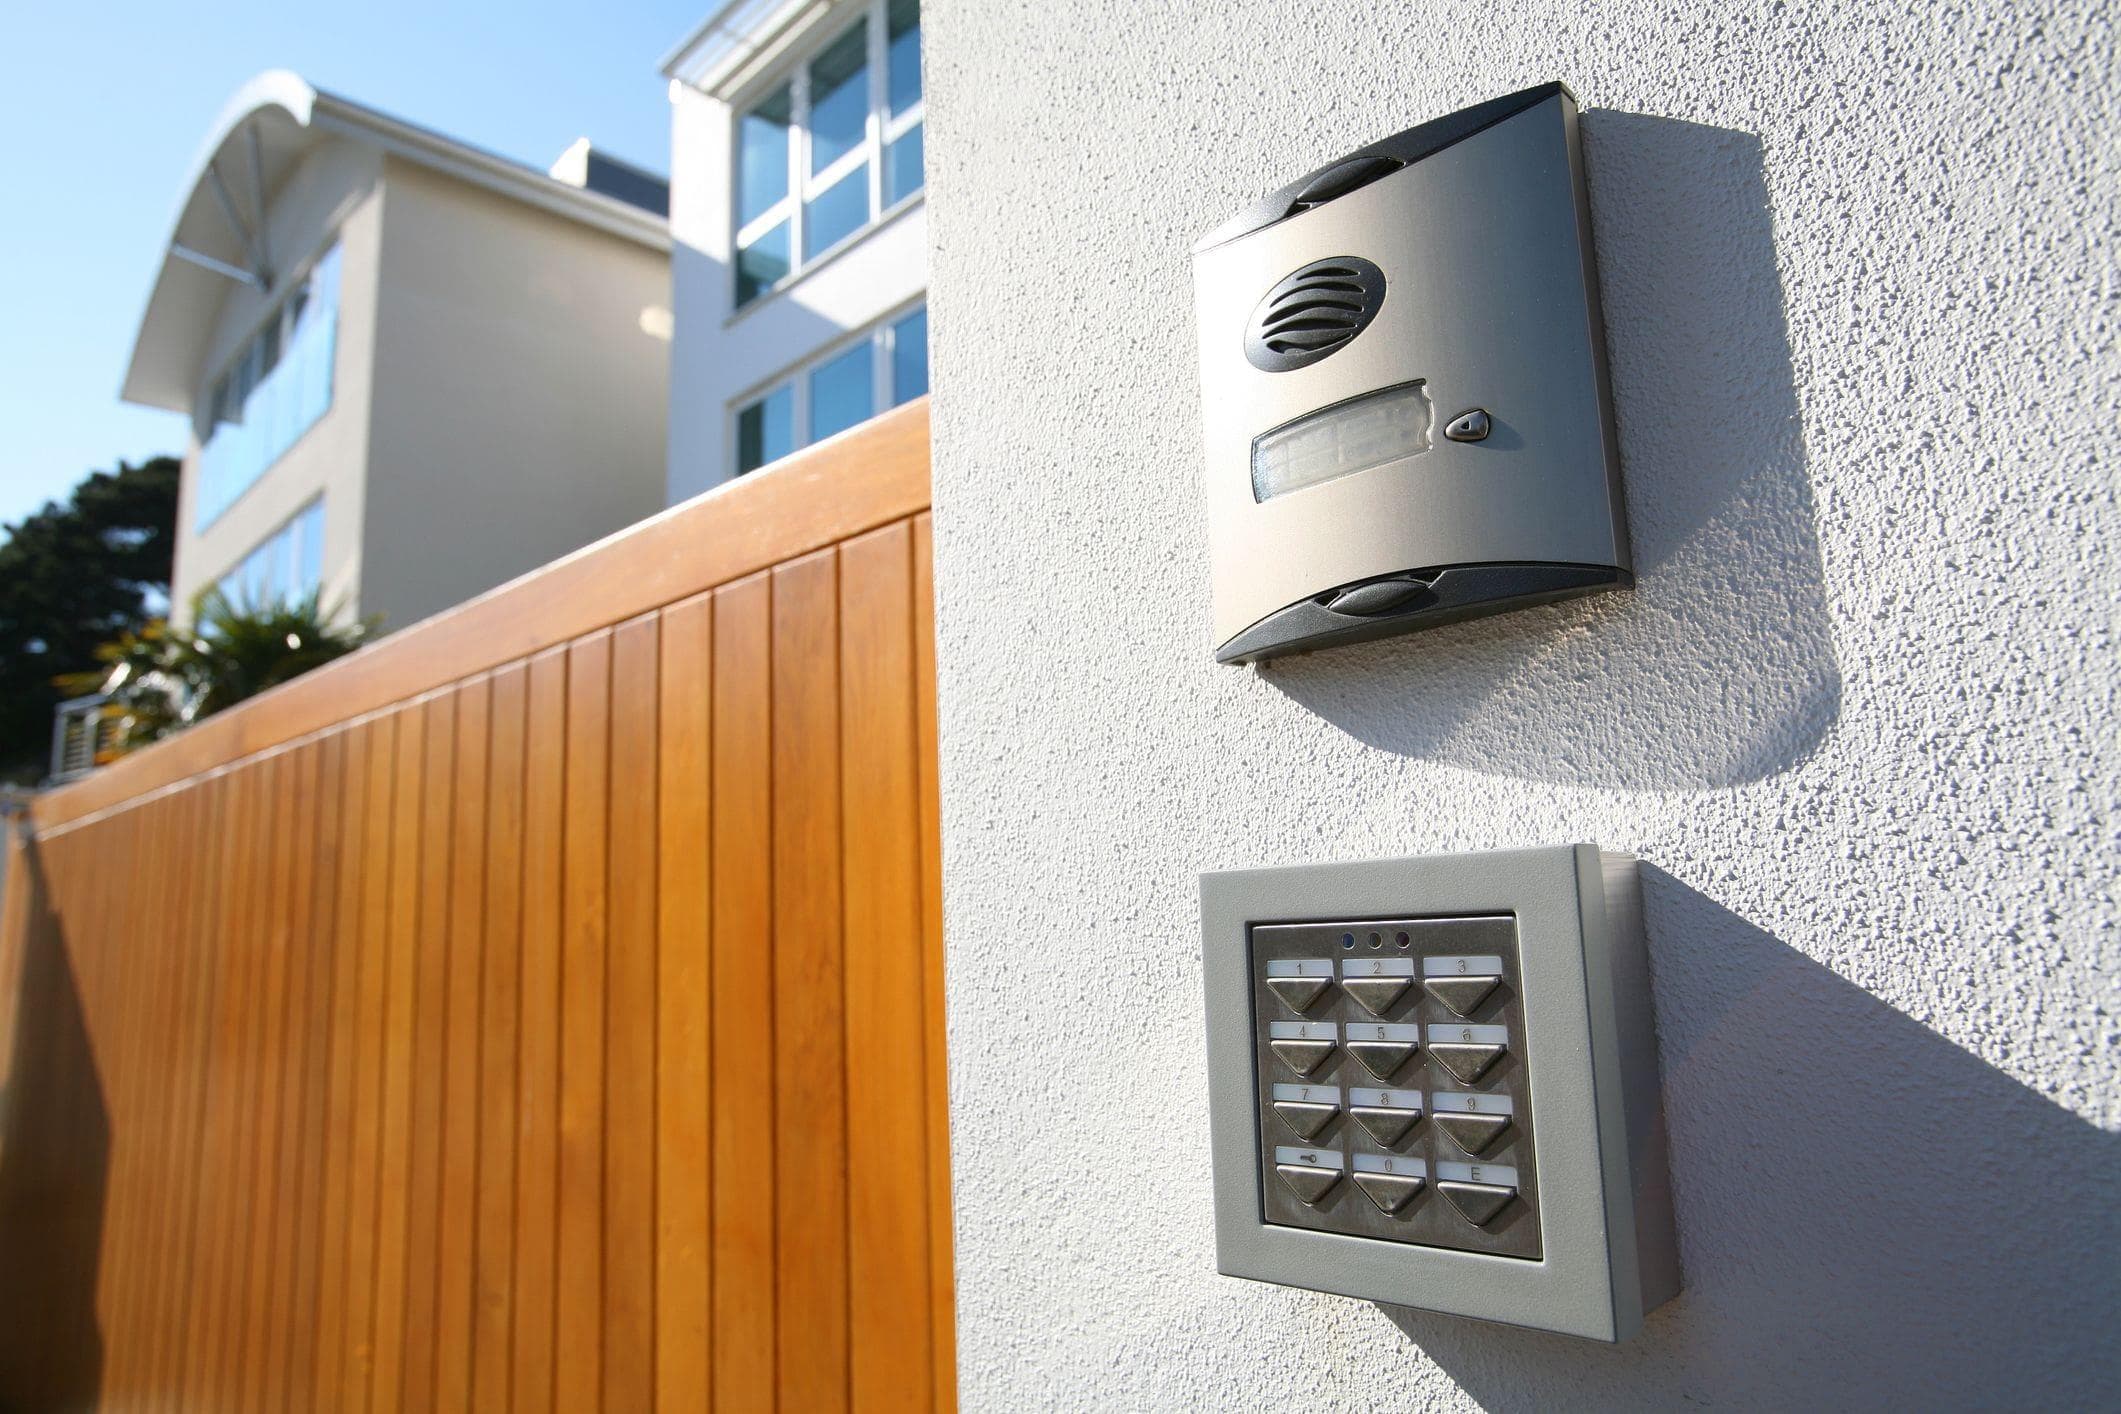 residential gate system with camera and keypad security